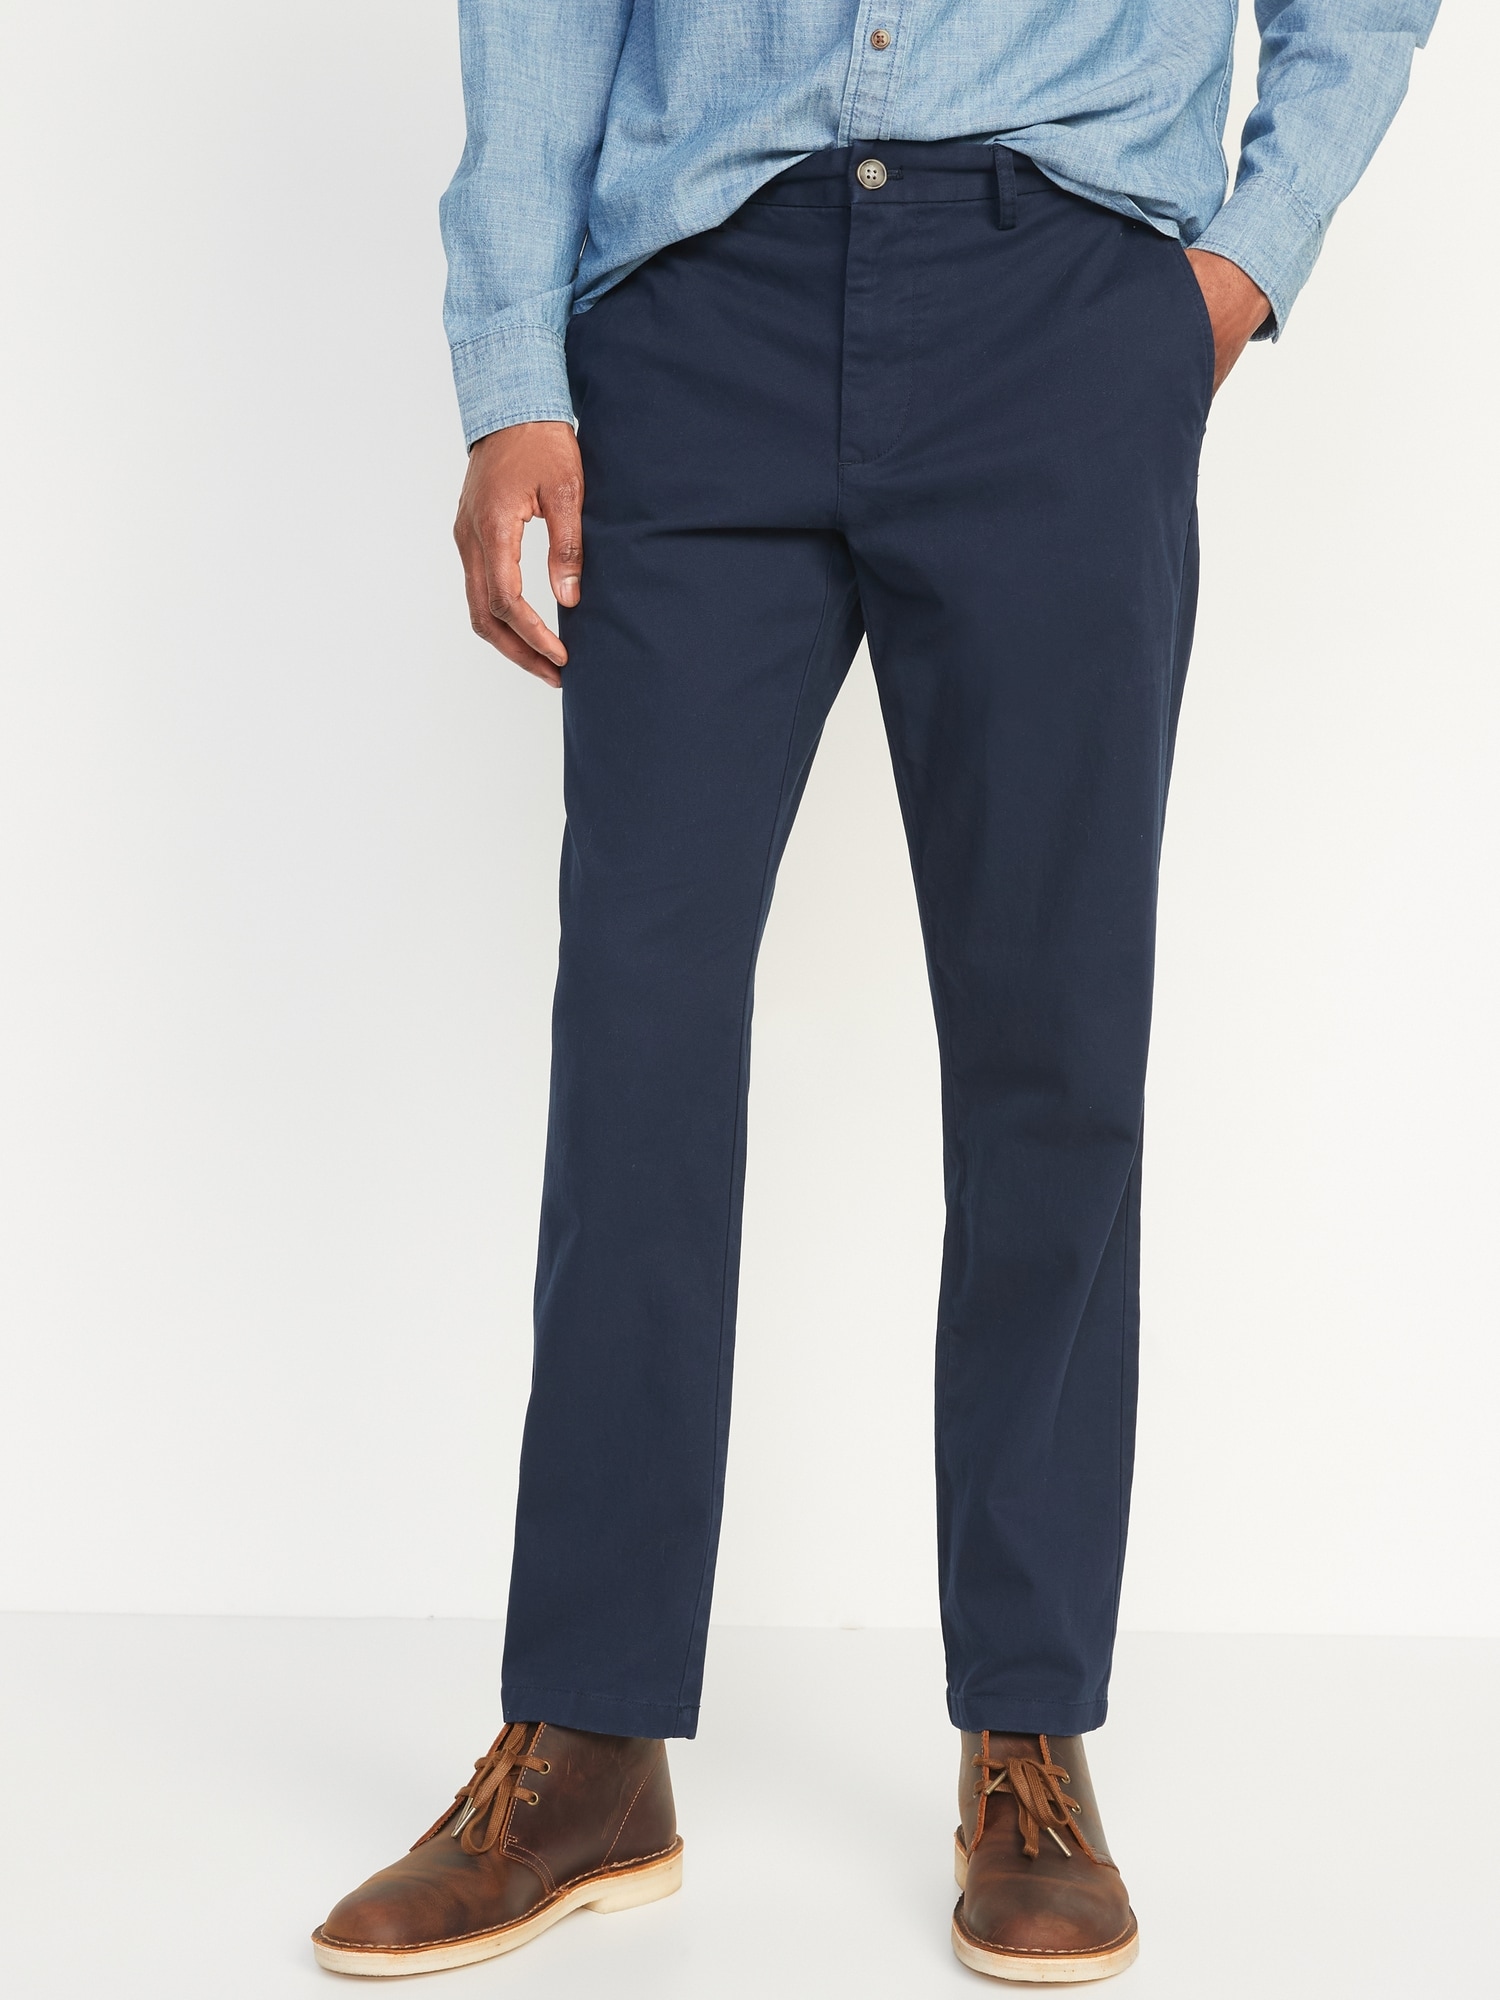 Straight Built-In Flex Rotation Chino Pants | Old Navy